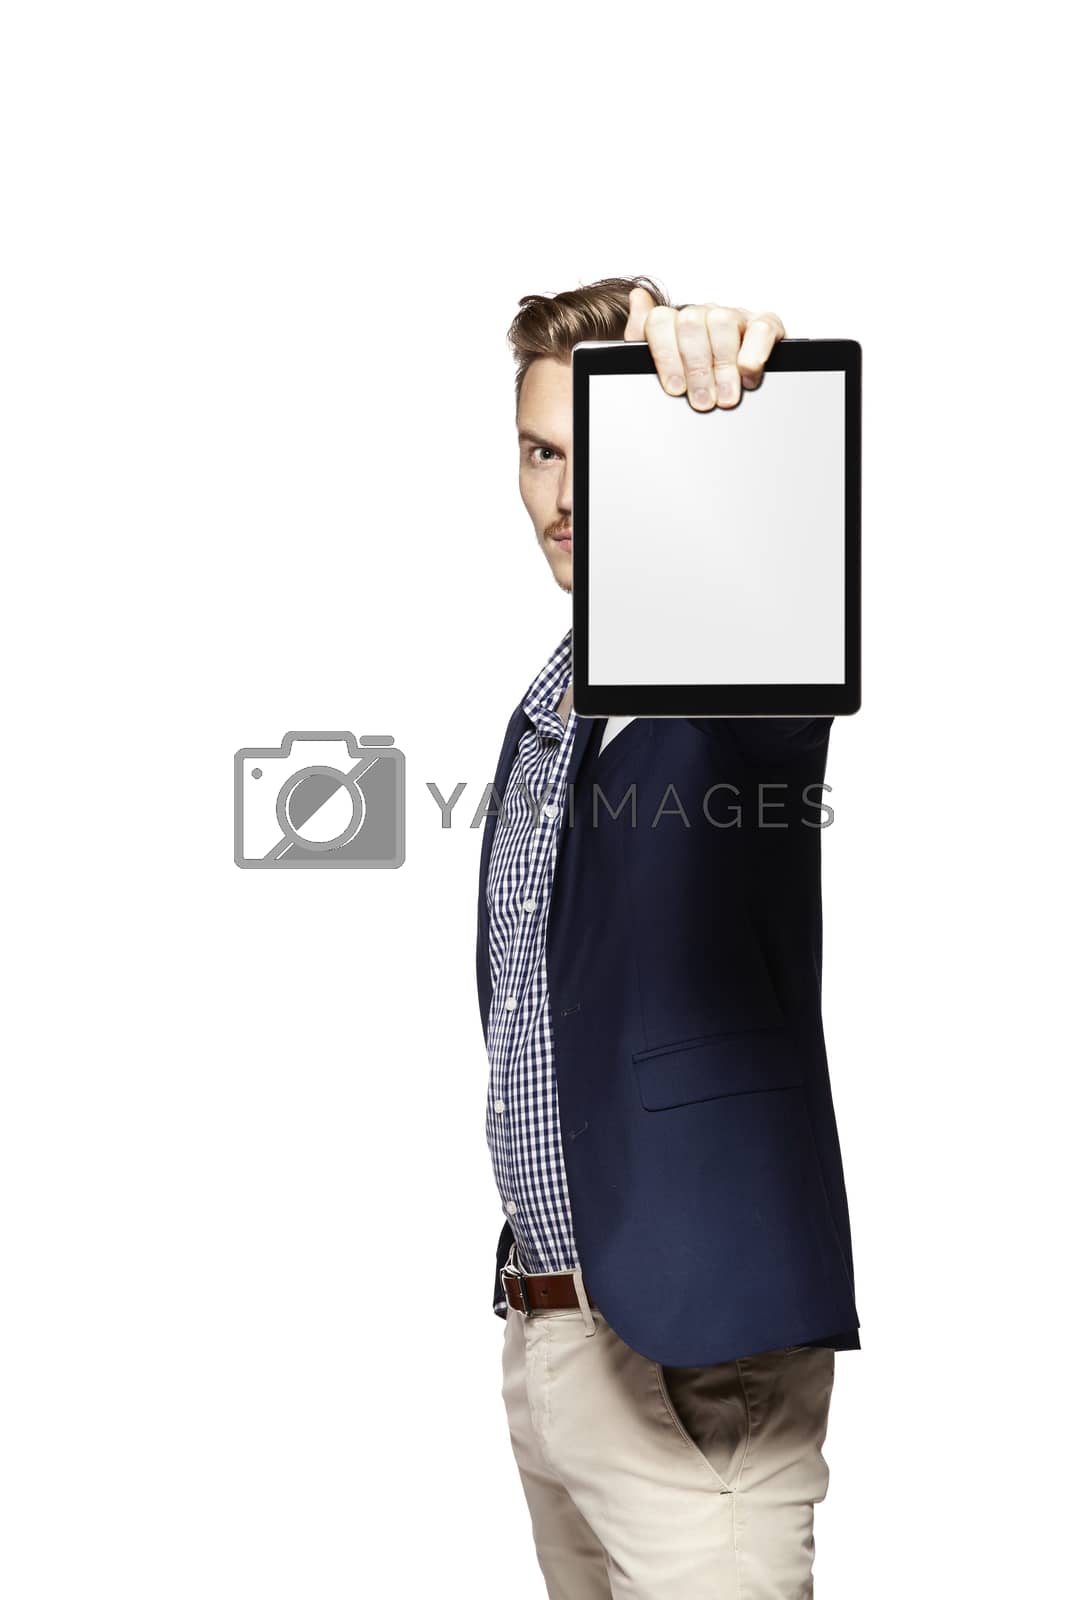 Royalty free image of Showing a digital tablet by filipw